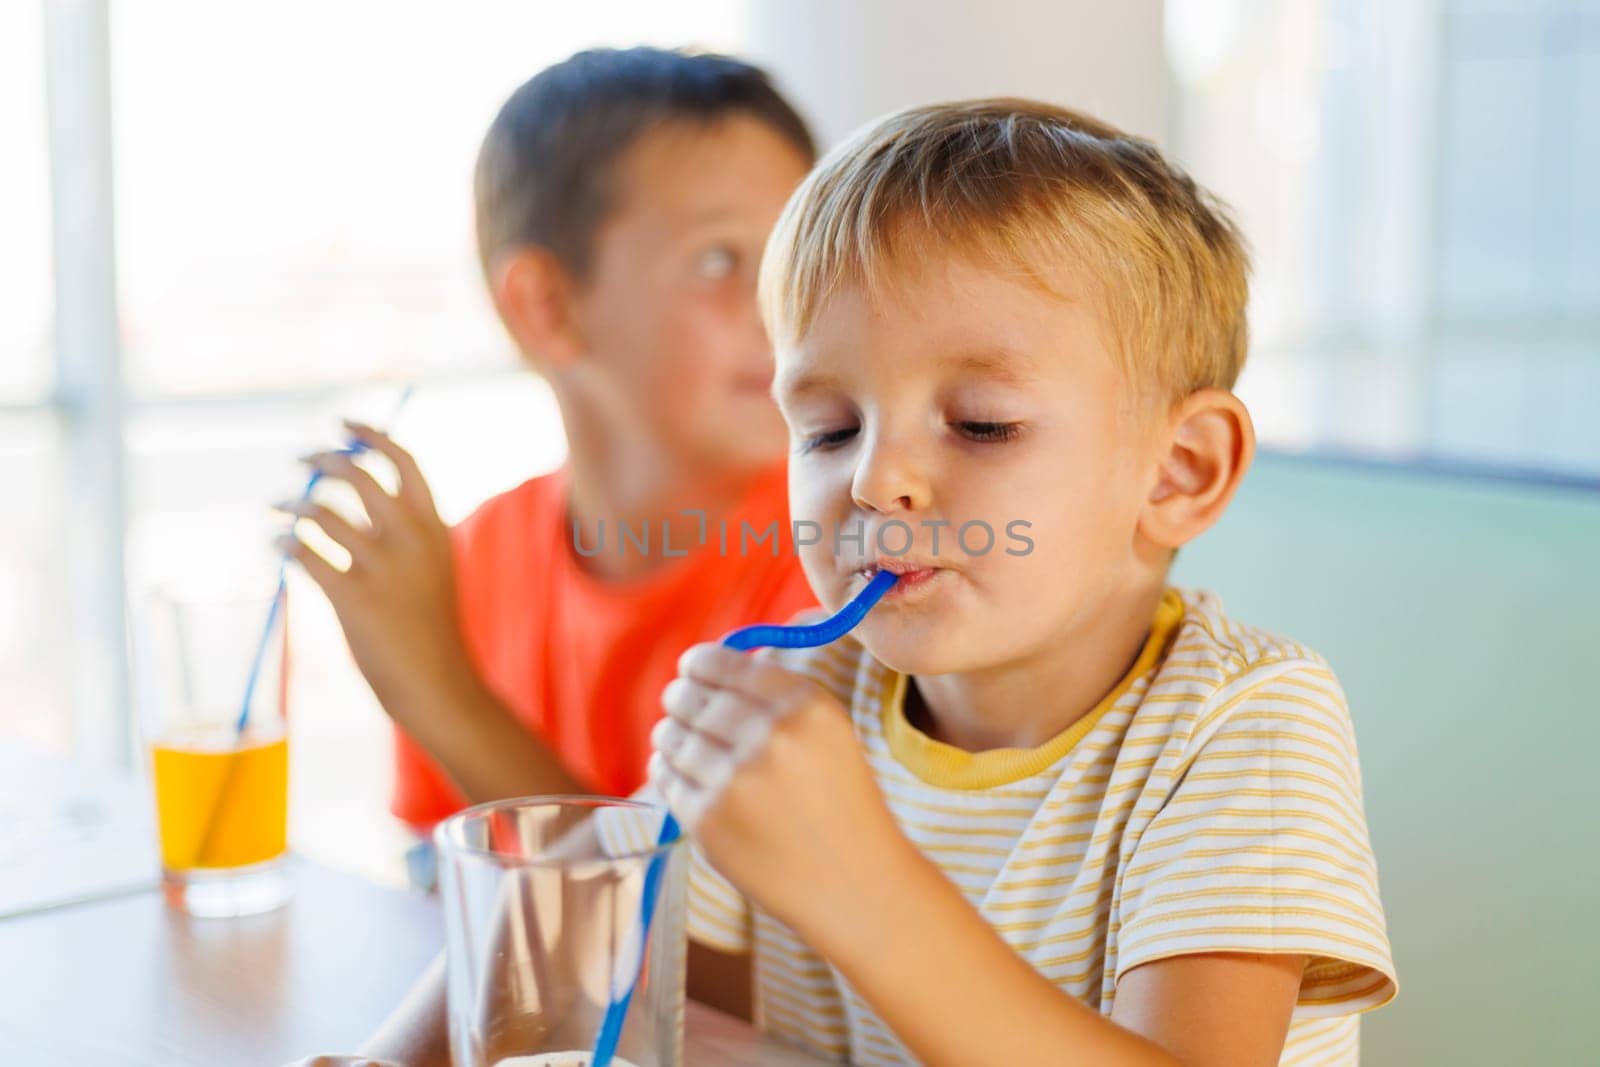 A young boy sipping juice through a straw with his brother in the background